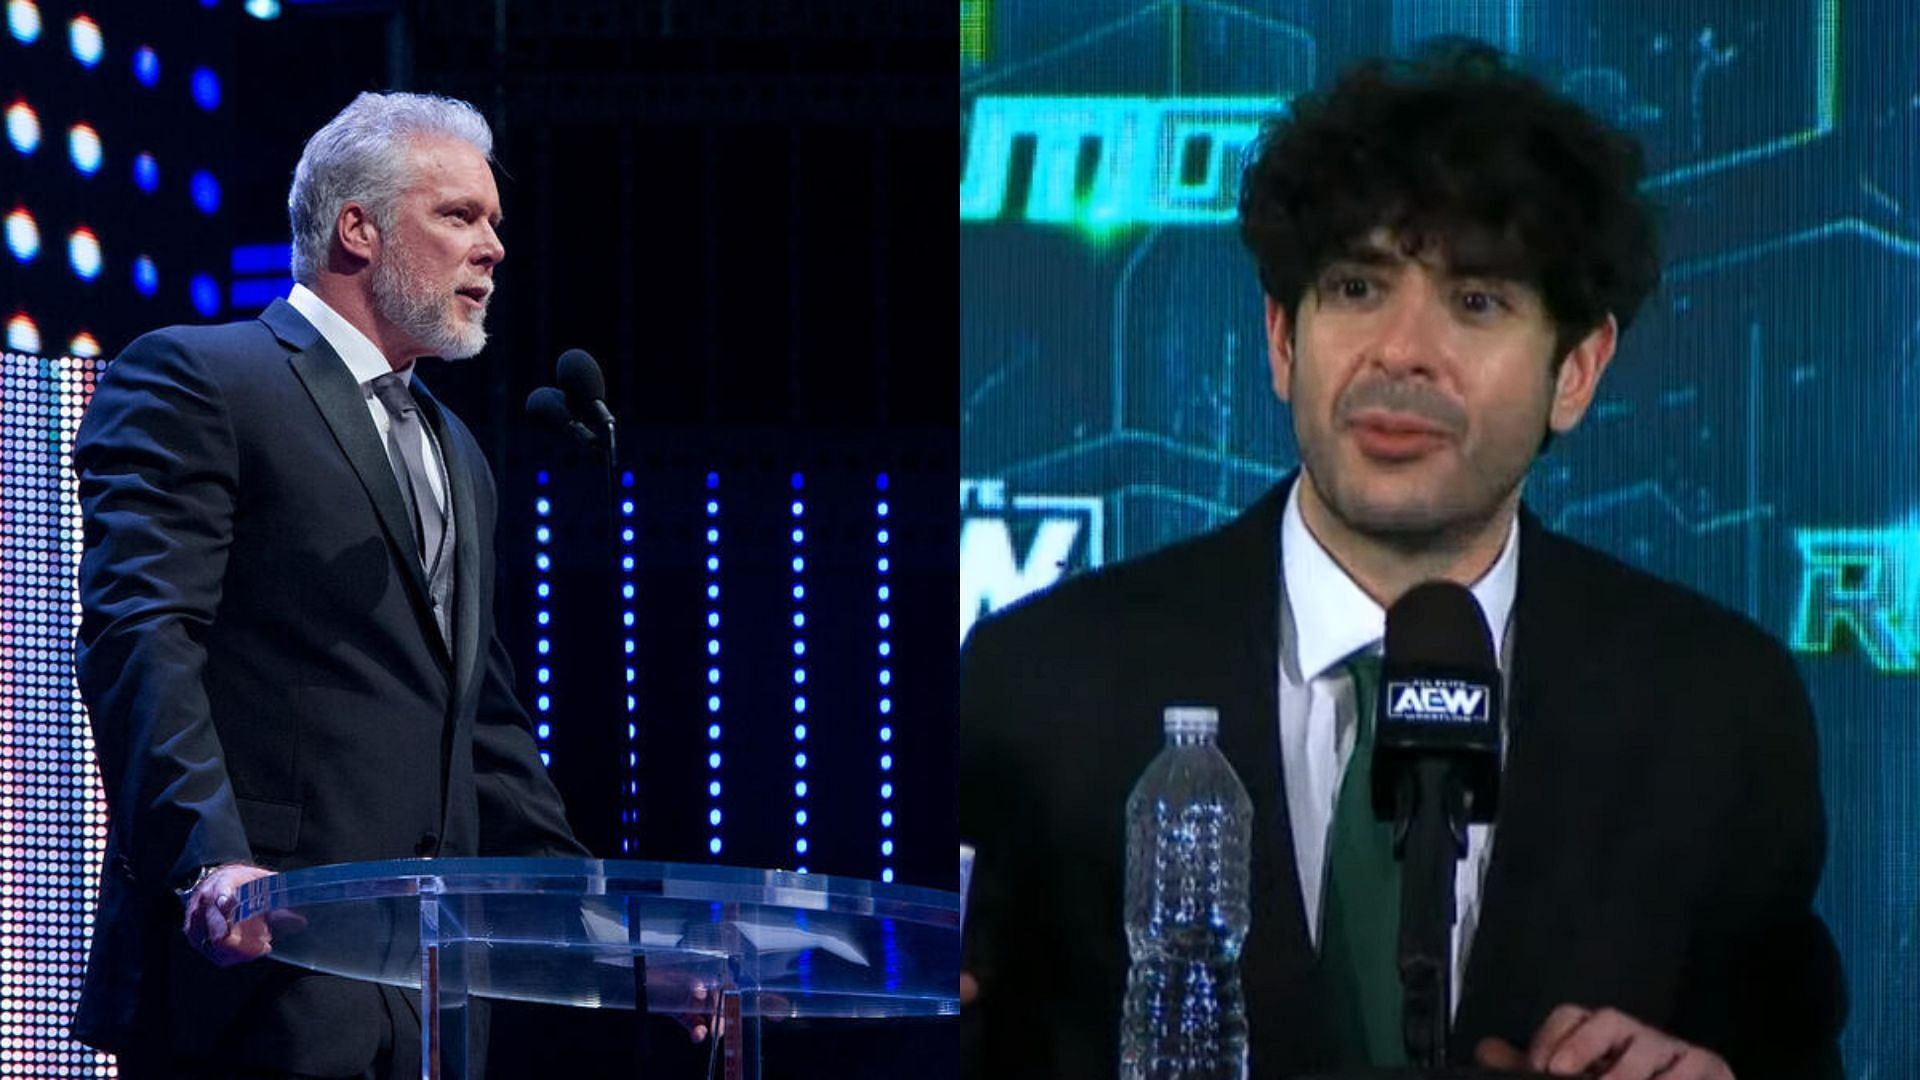 Kevin Nash (left) is a two-time WWE Hall of Famer and Tony Khan (right) is the president of AEW